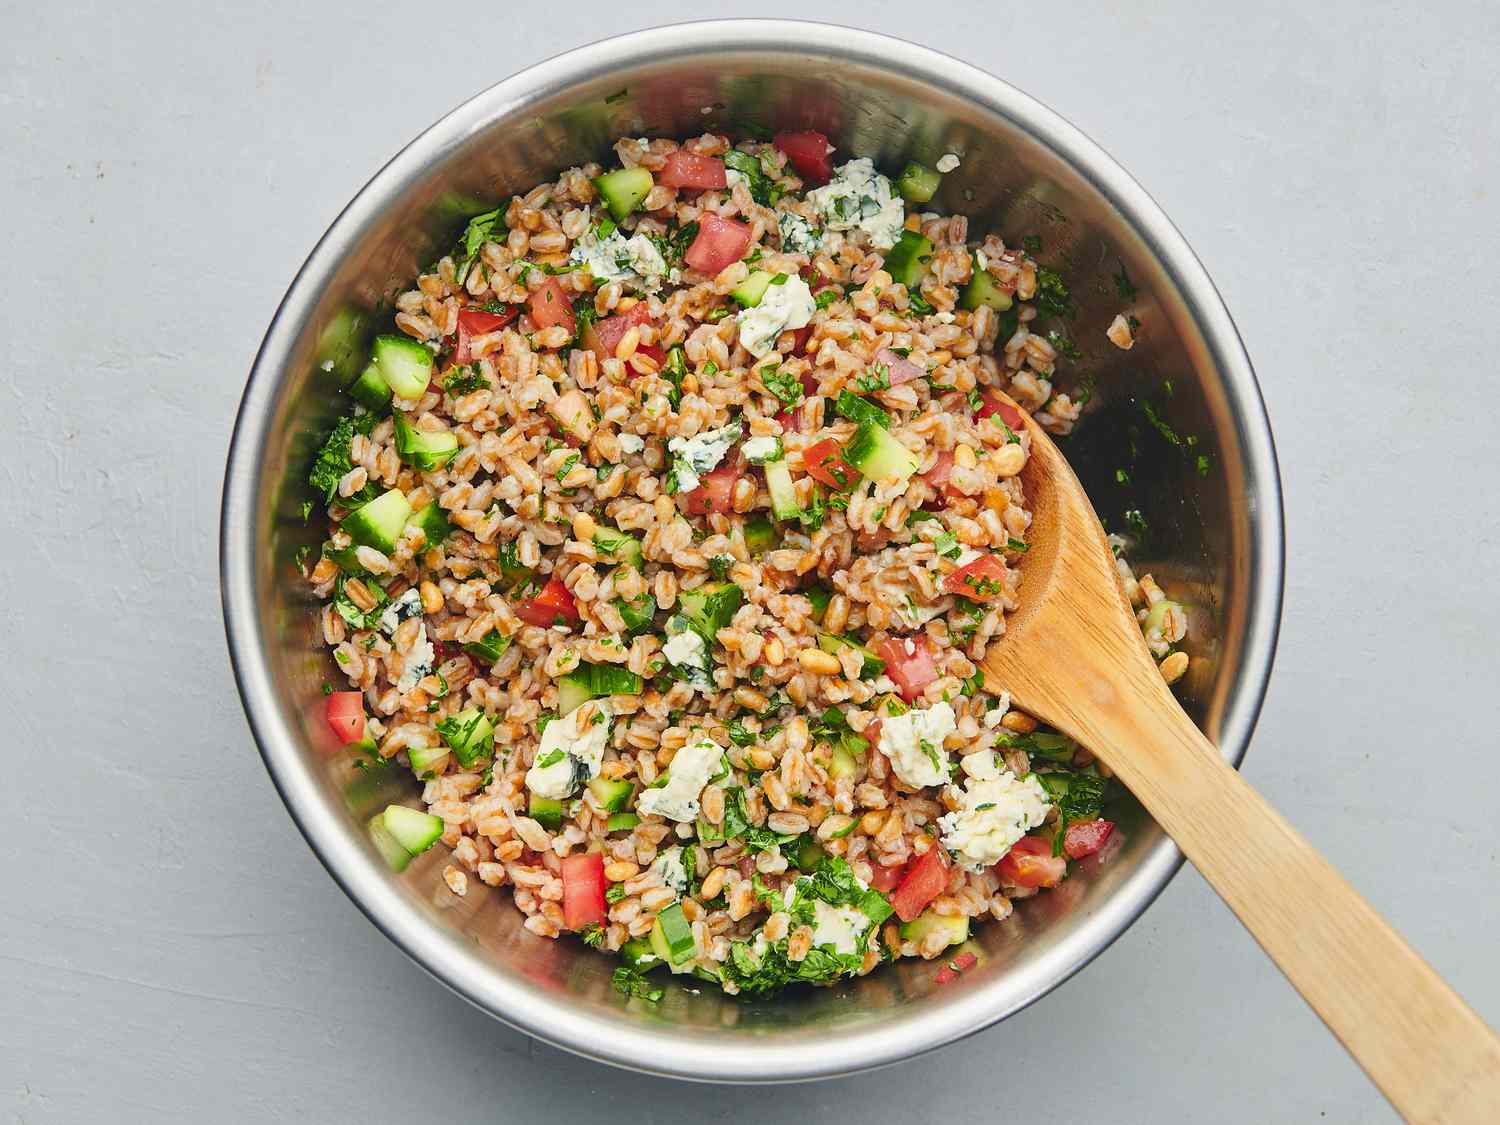 Remaining salad ingredients gently folded into cooled farro, with vinaigrette added